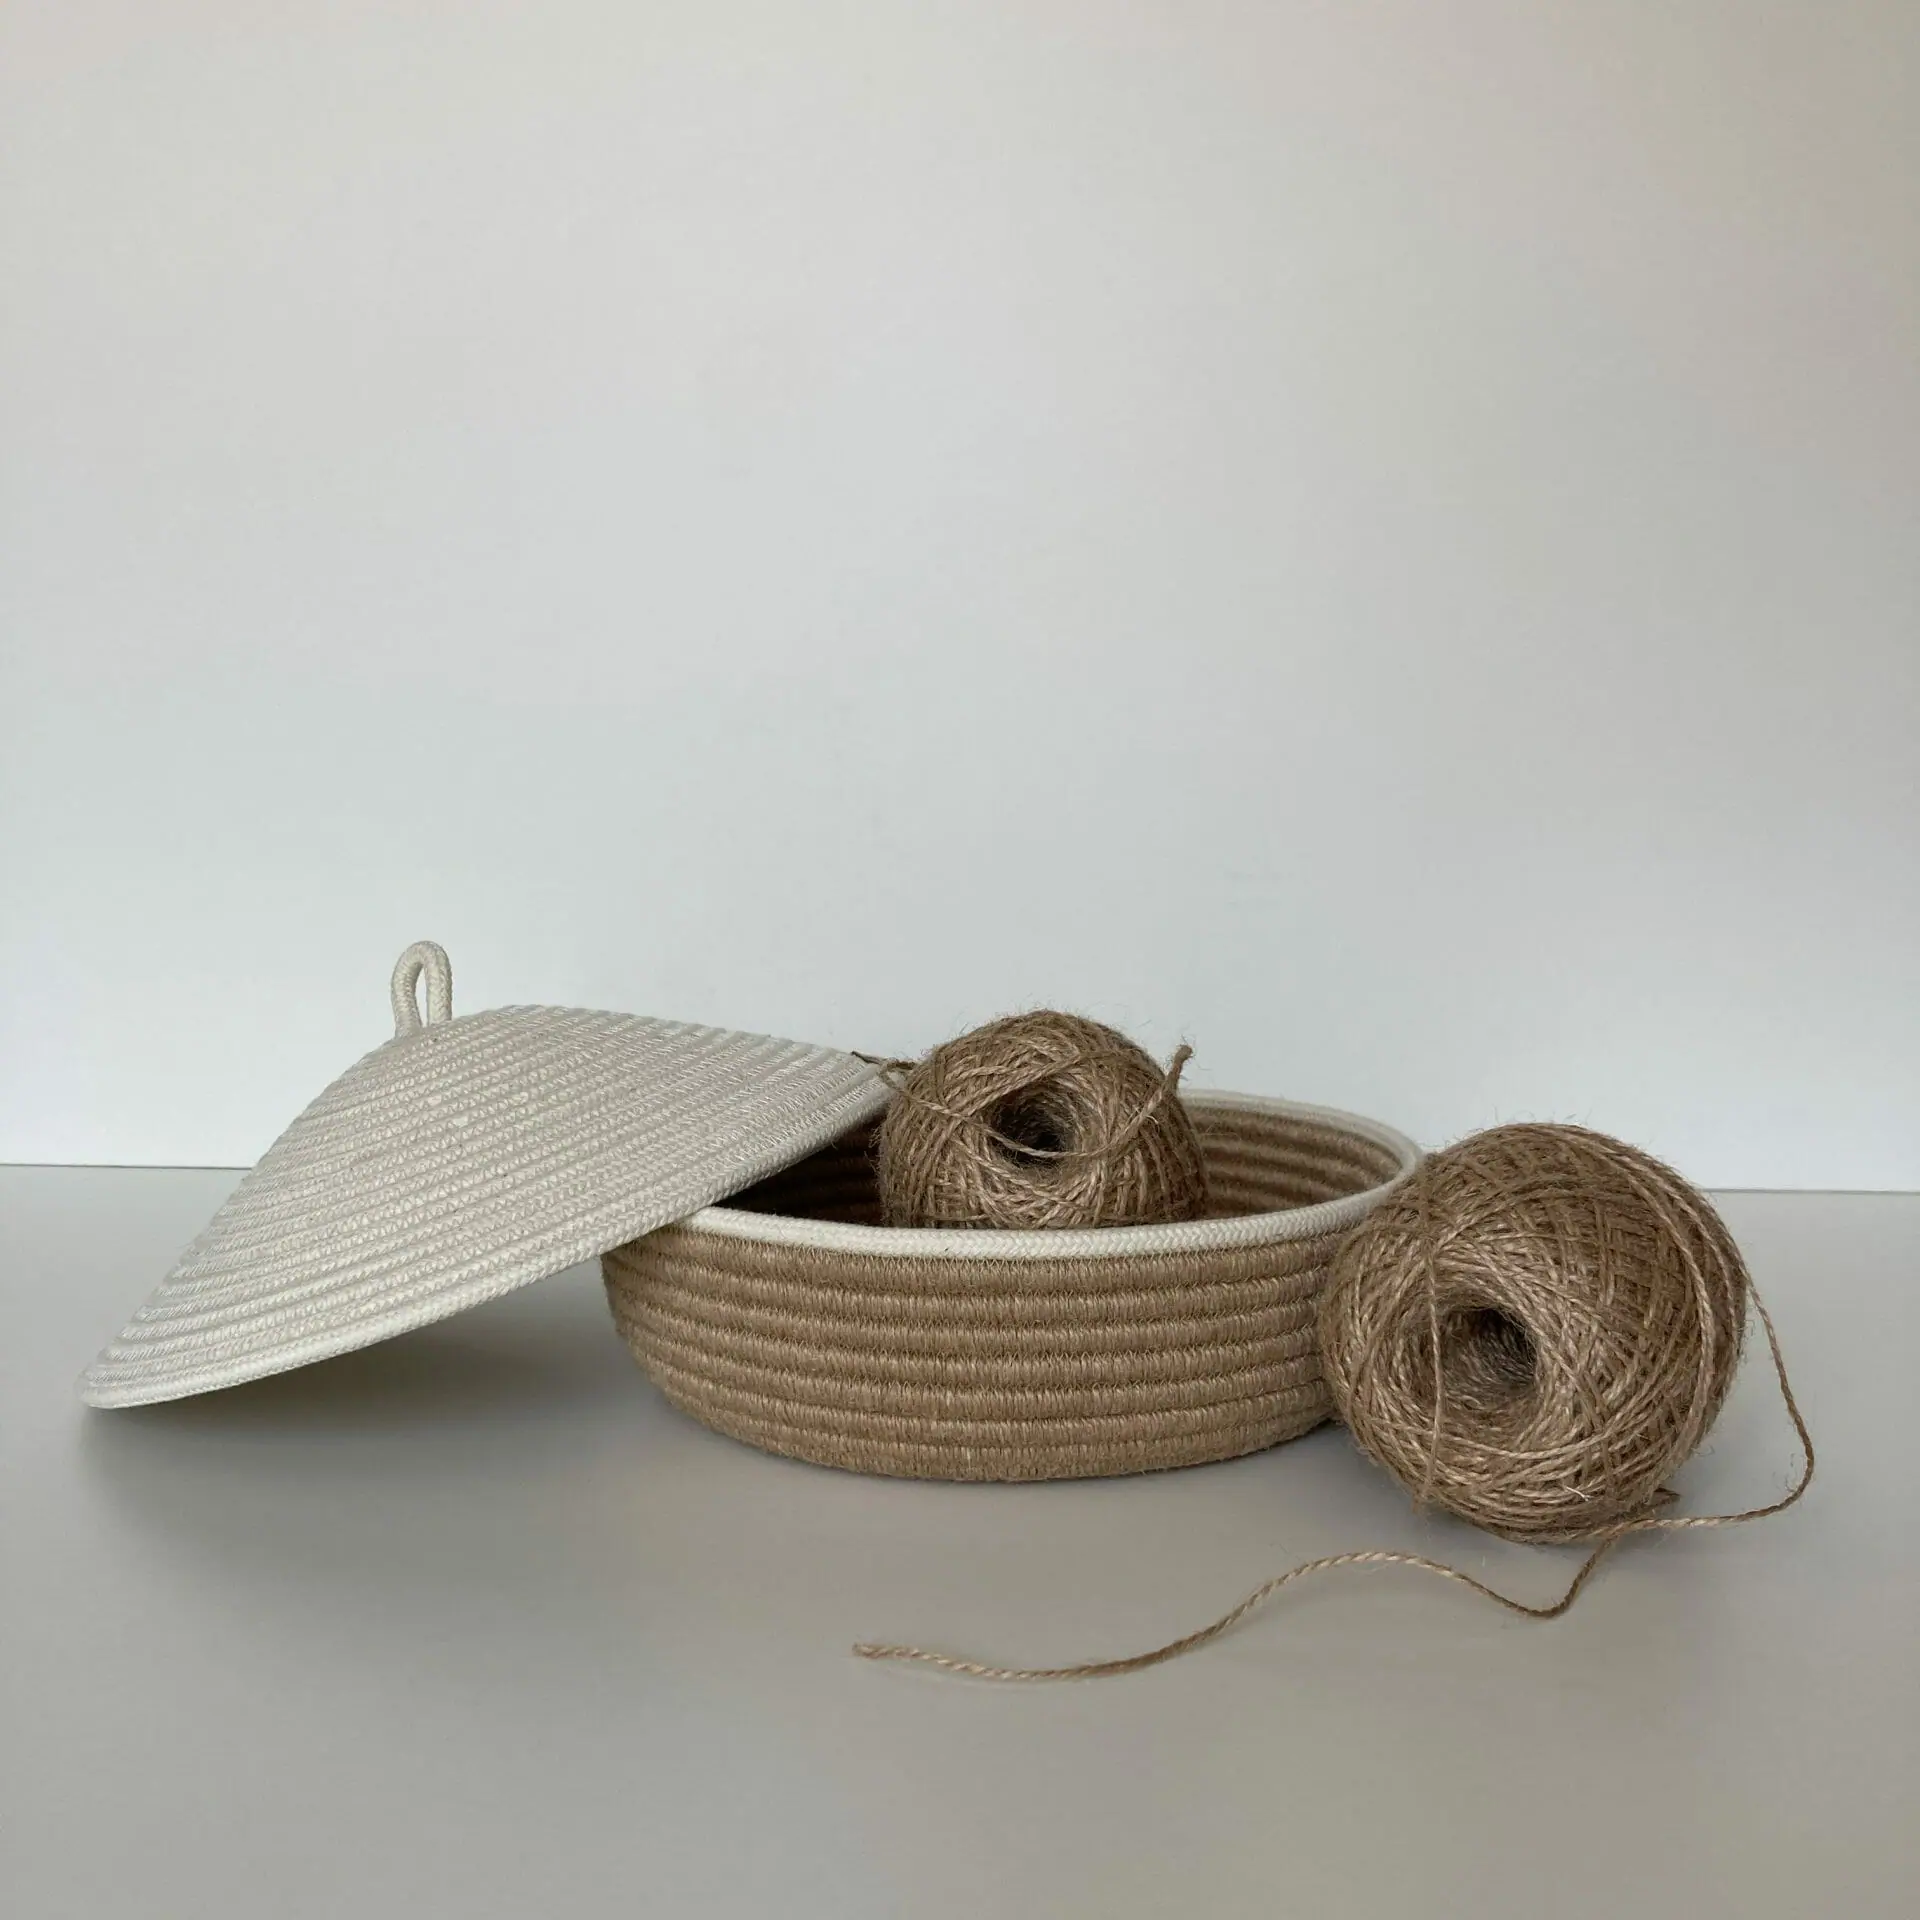 Jute basket with lid 22 cm x 13 cm Cotton rope basket Free shipping